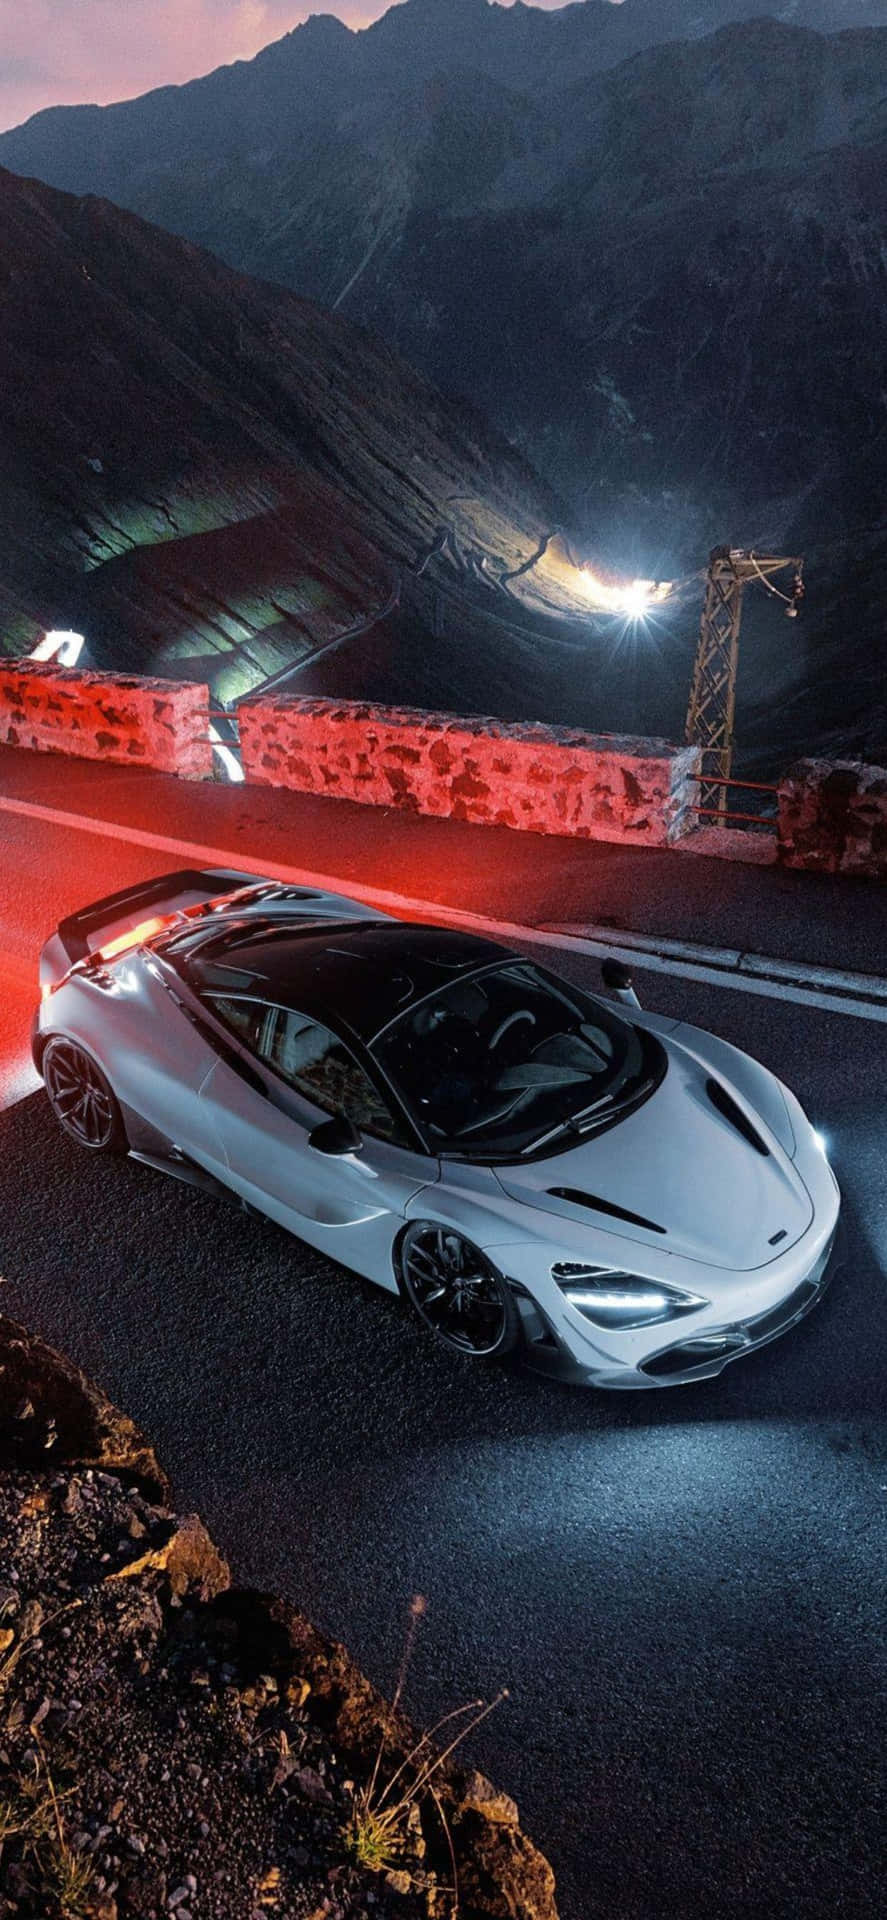 Iphone Xs Max Mclaren 720s Background Pearl White